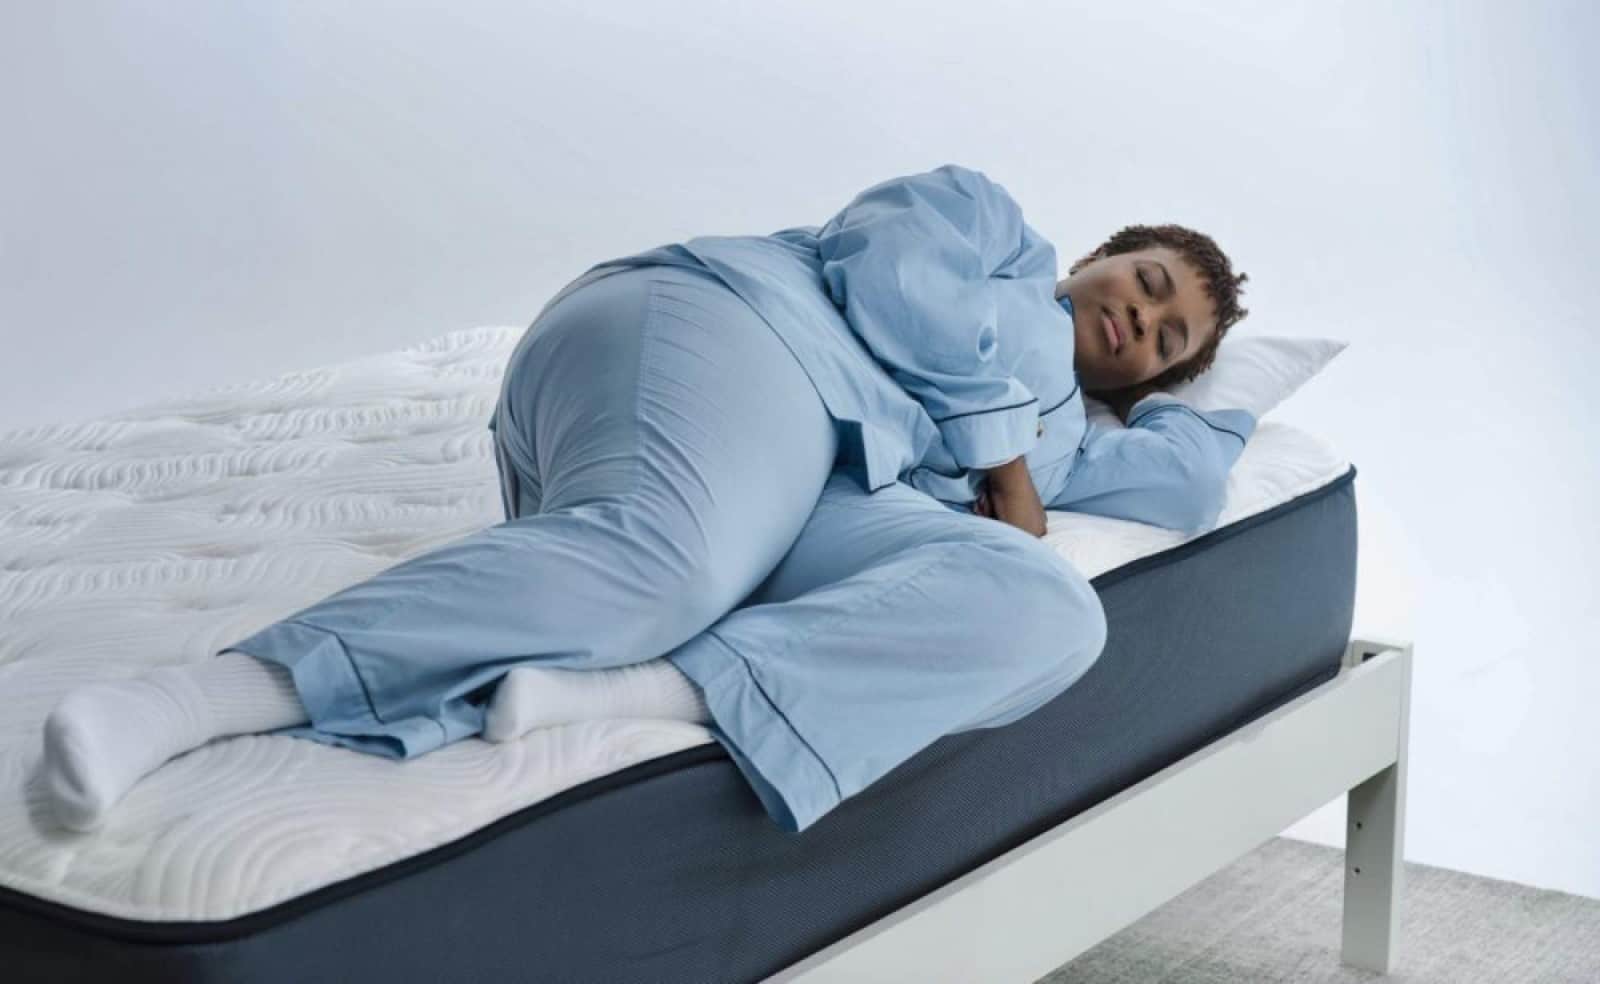 10 Best Mattresses for Heavy People (Sept. 2021) â Reviews ...